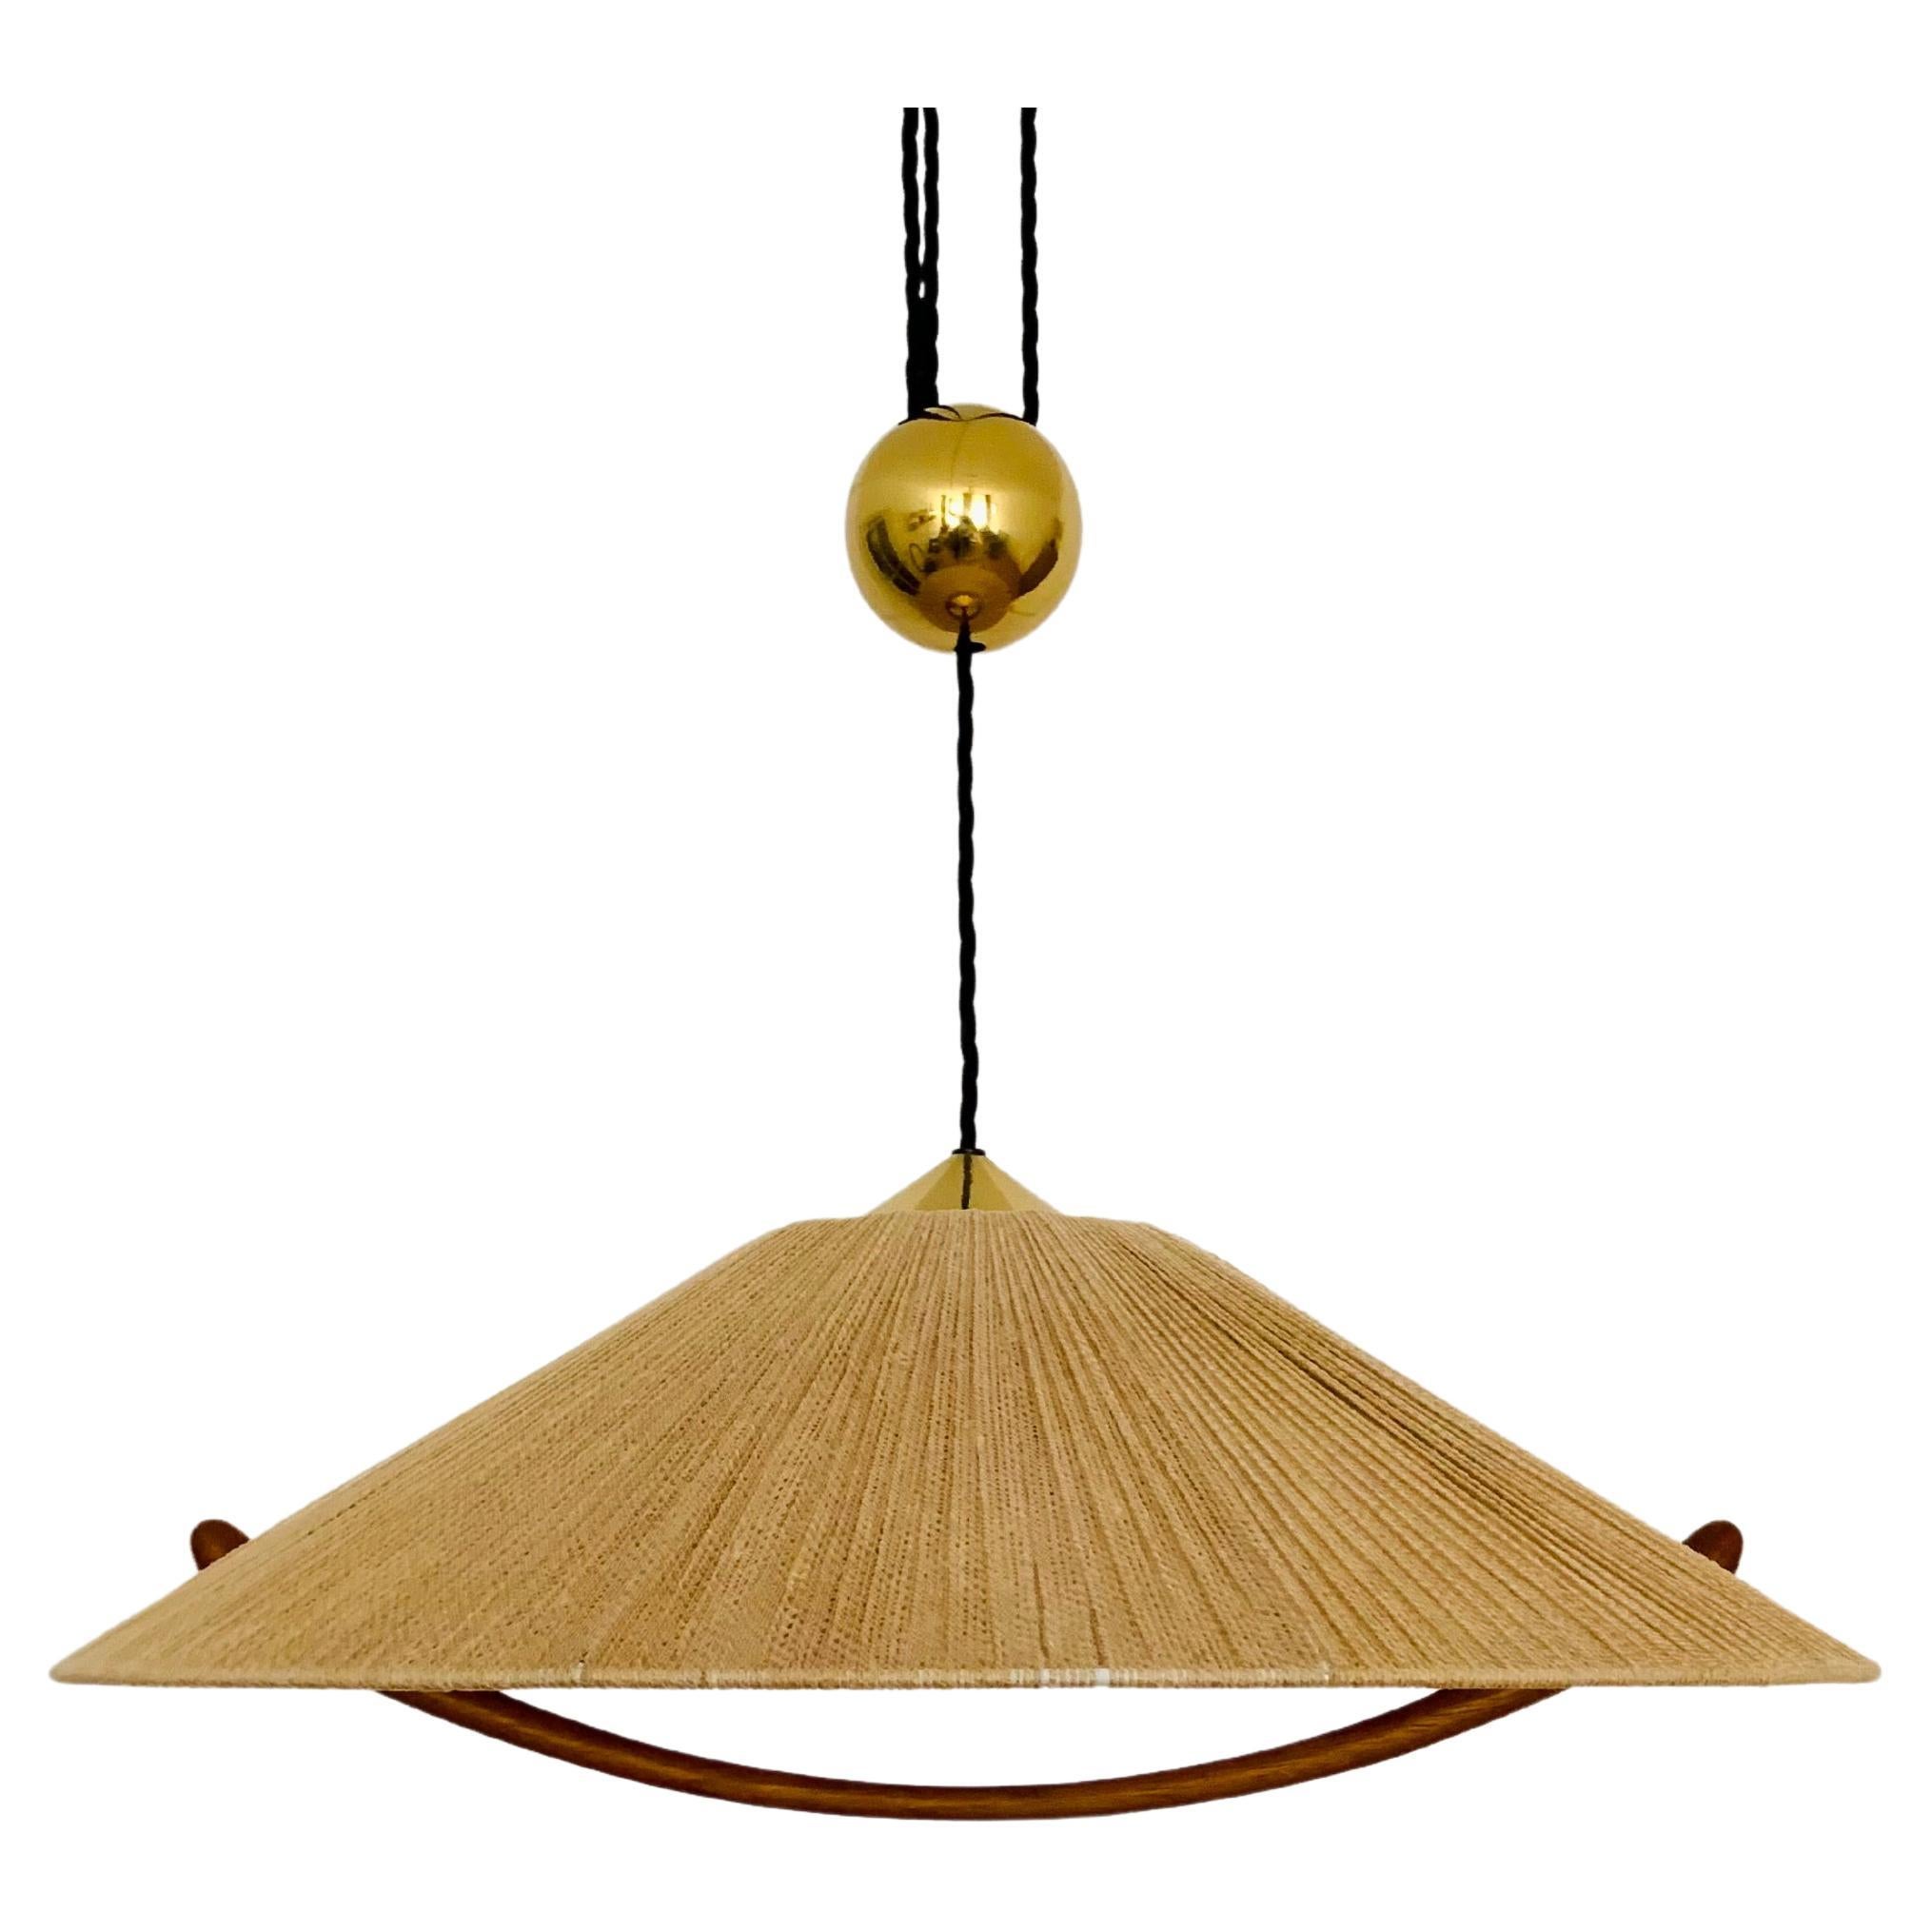 Adjustable Pendant Lamp with Counterweight by Florian Schulz